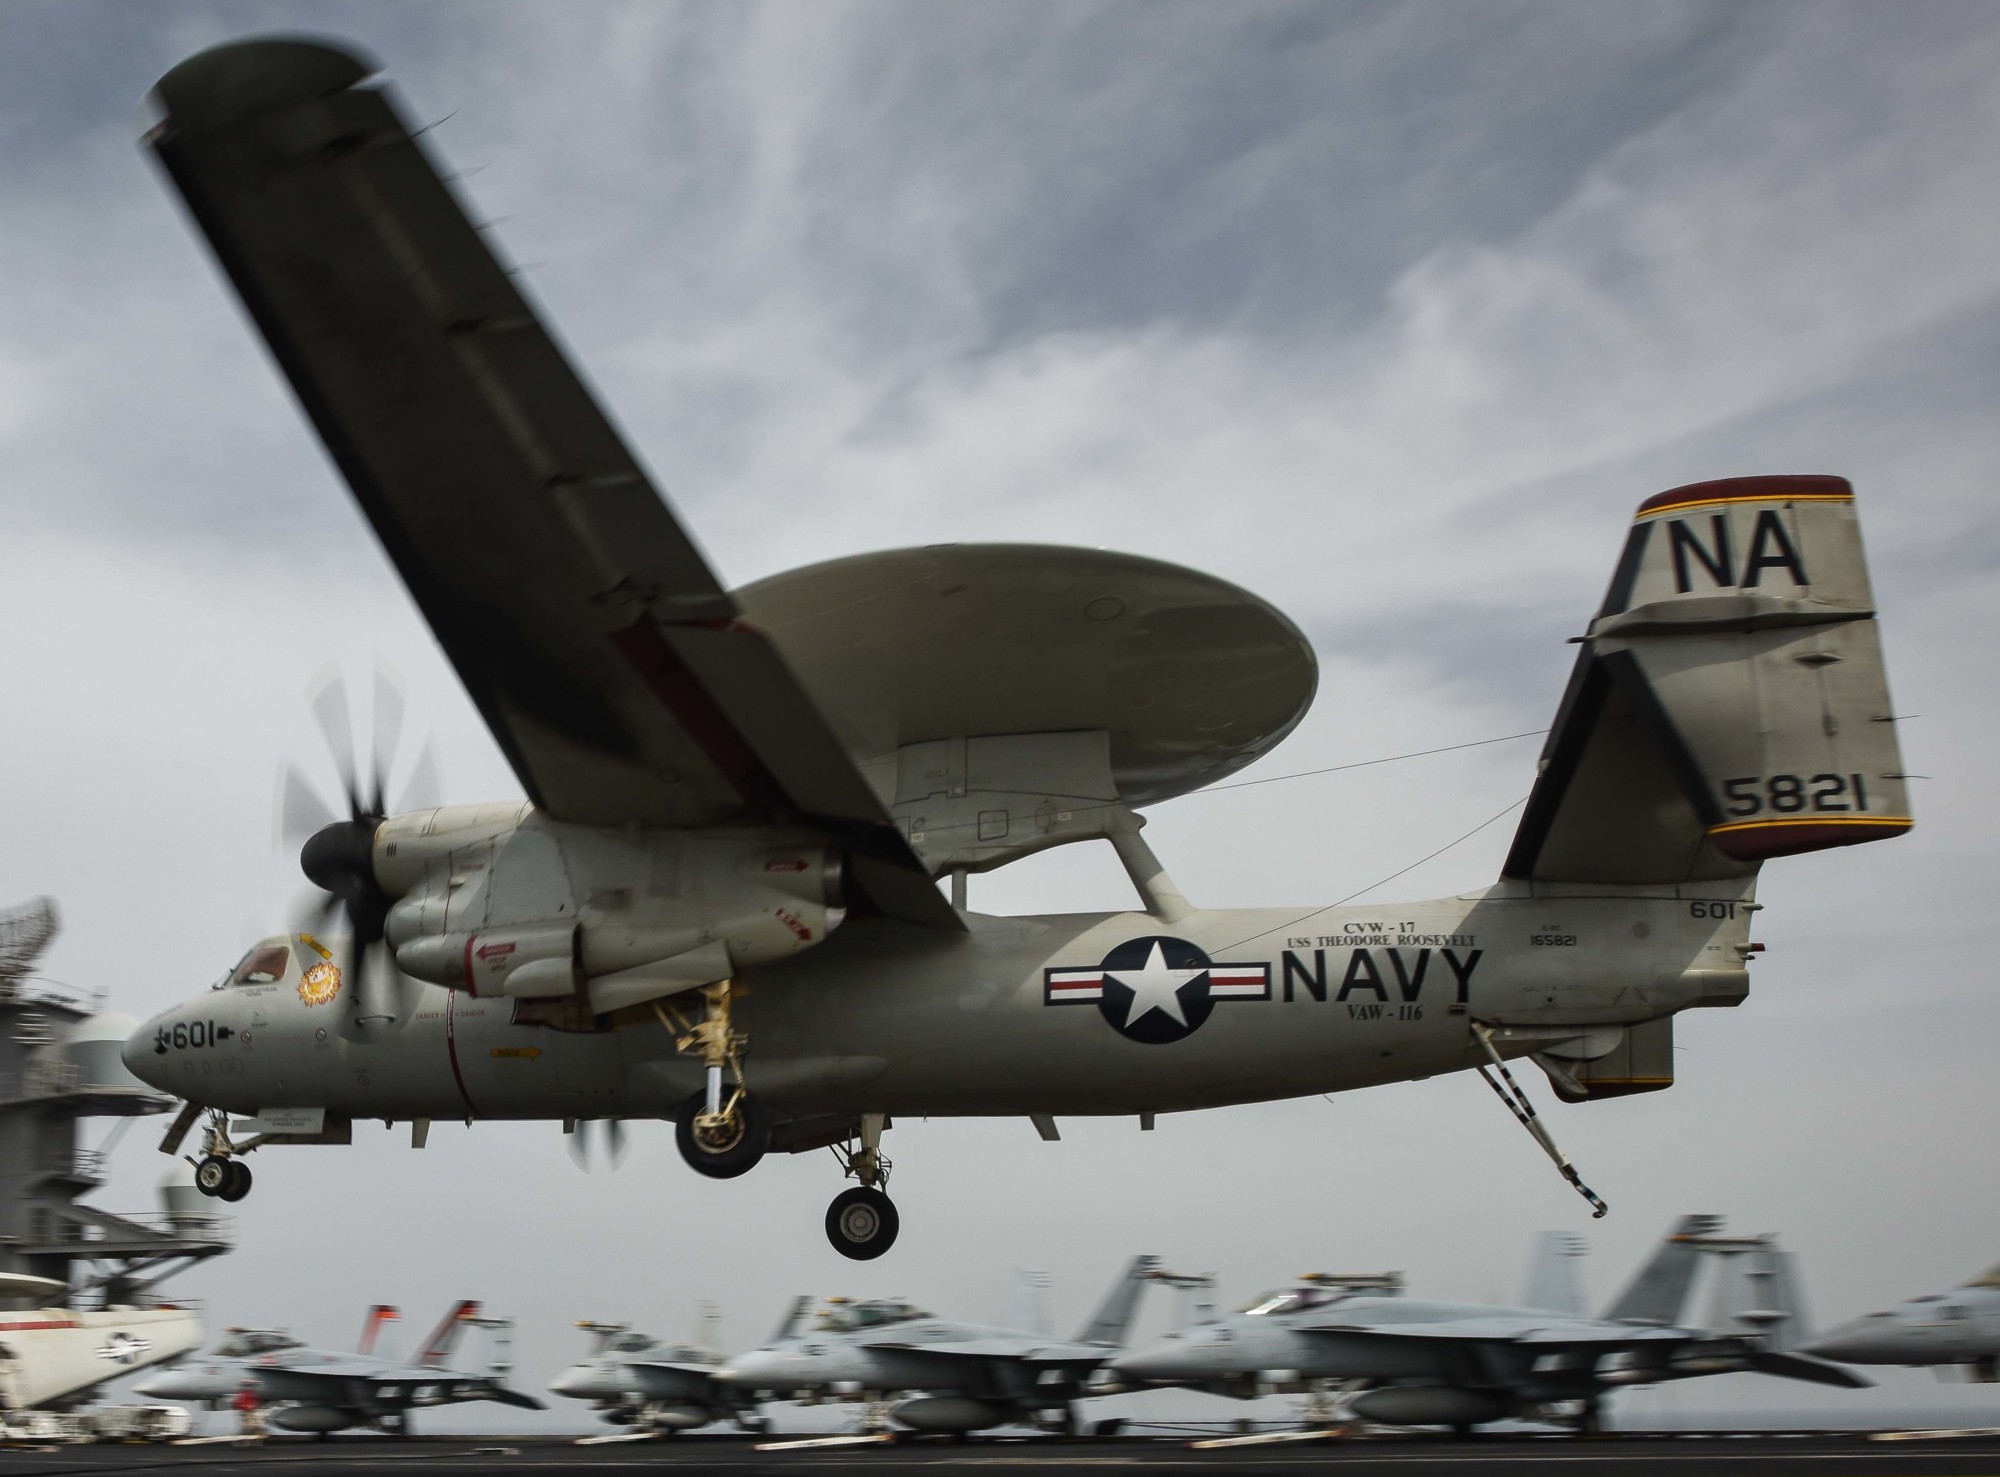 vaw-116 sun kings airborne command control squadron carrier early warning cvw-17 uss theodore roosevelt cvn-71 67